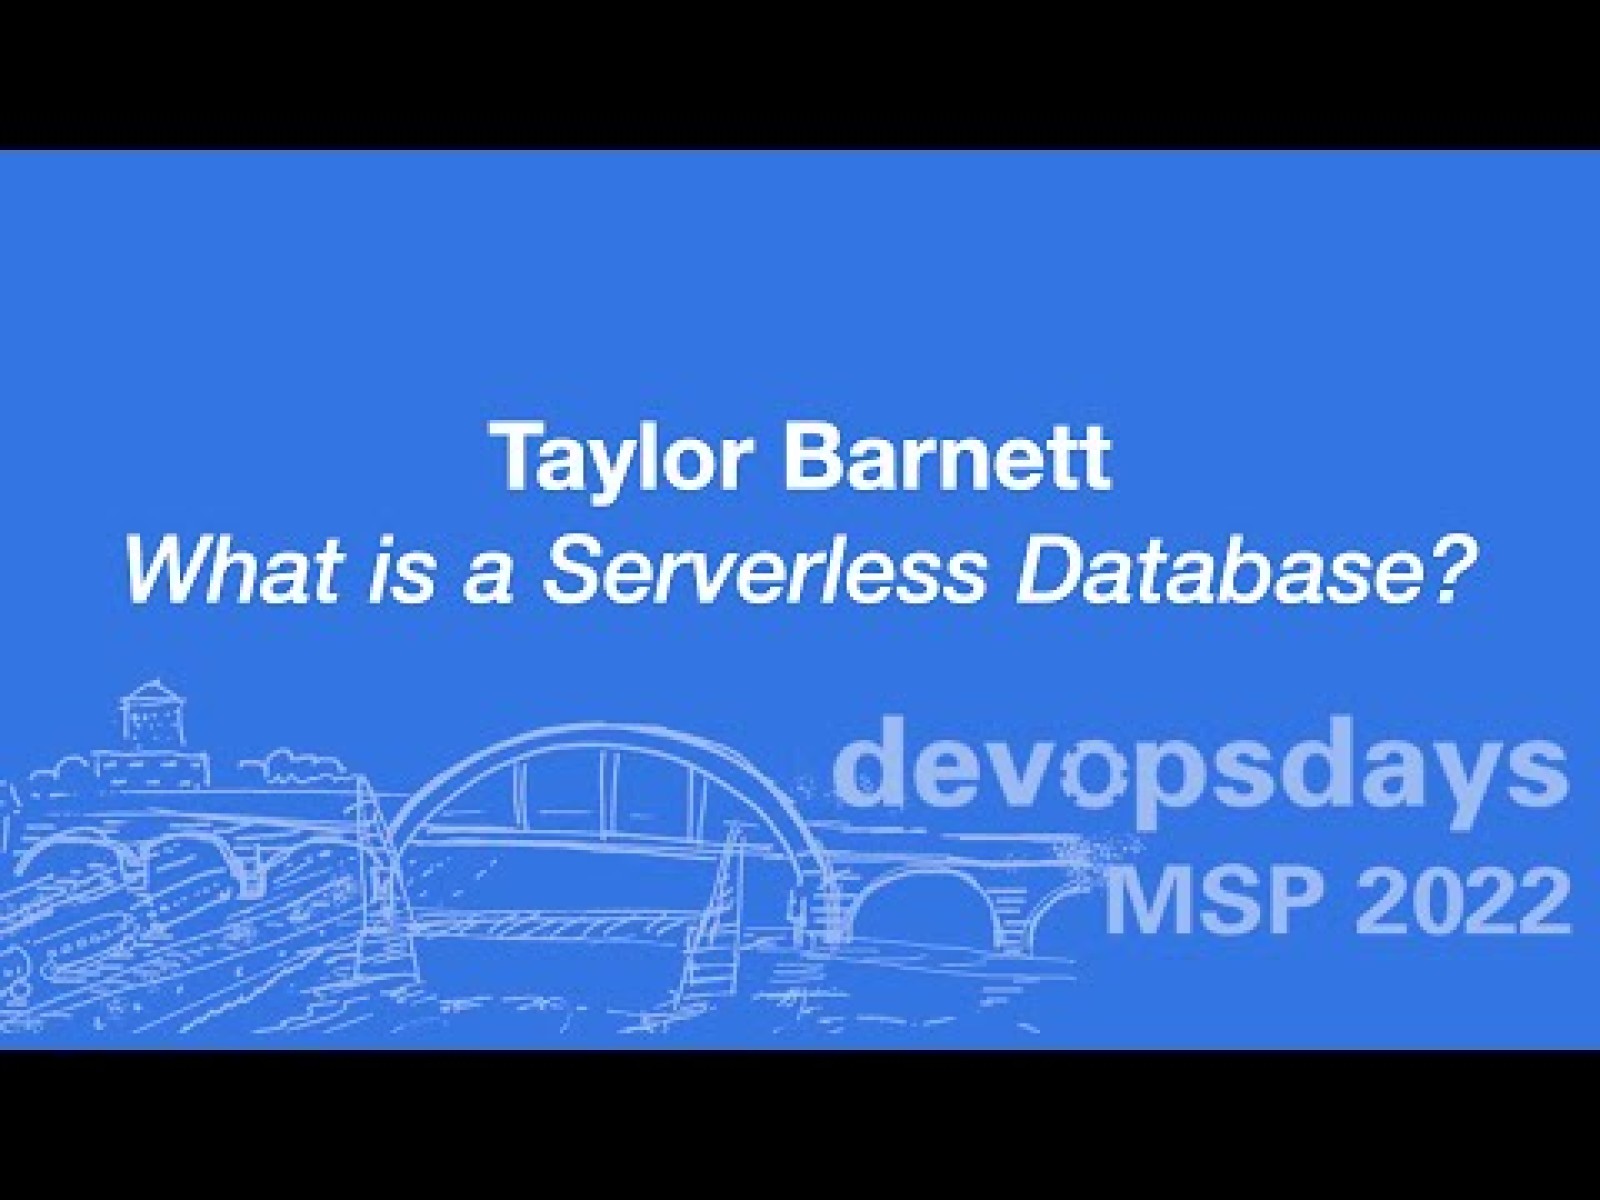 What is a serverless database?